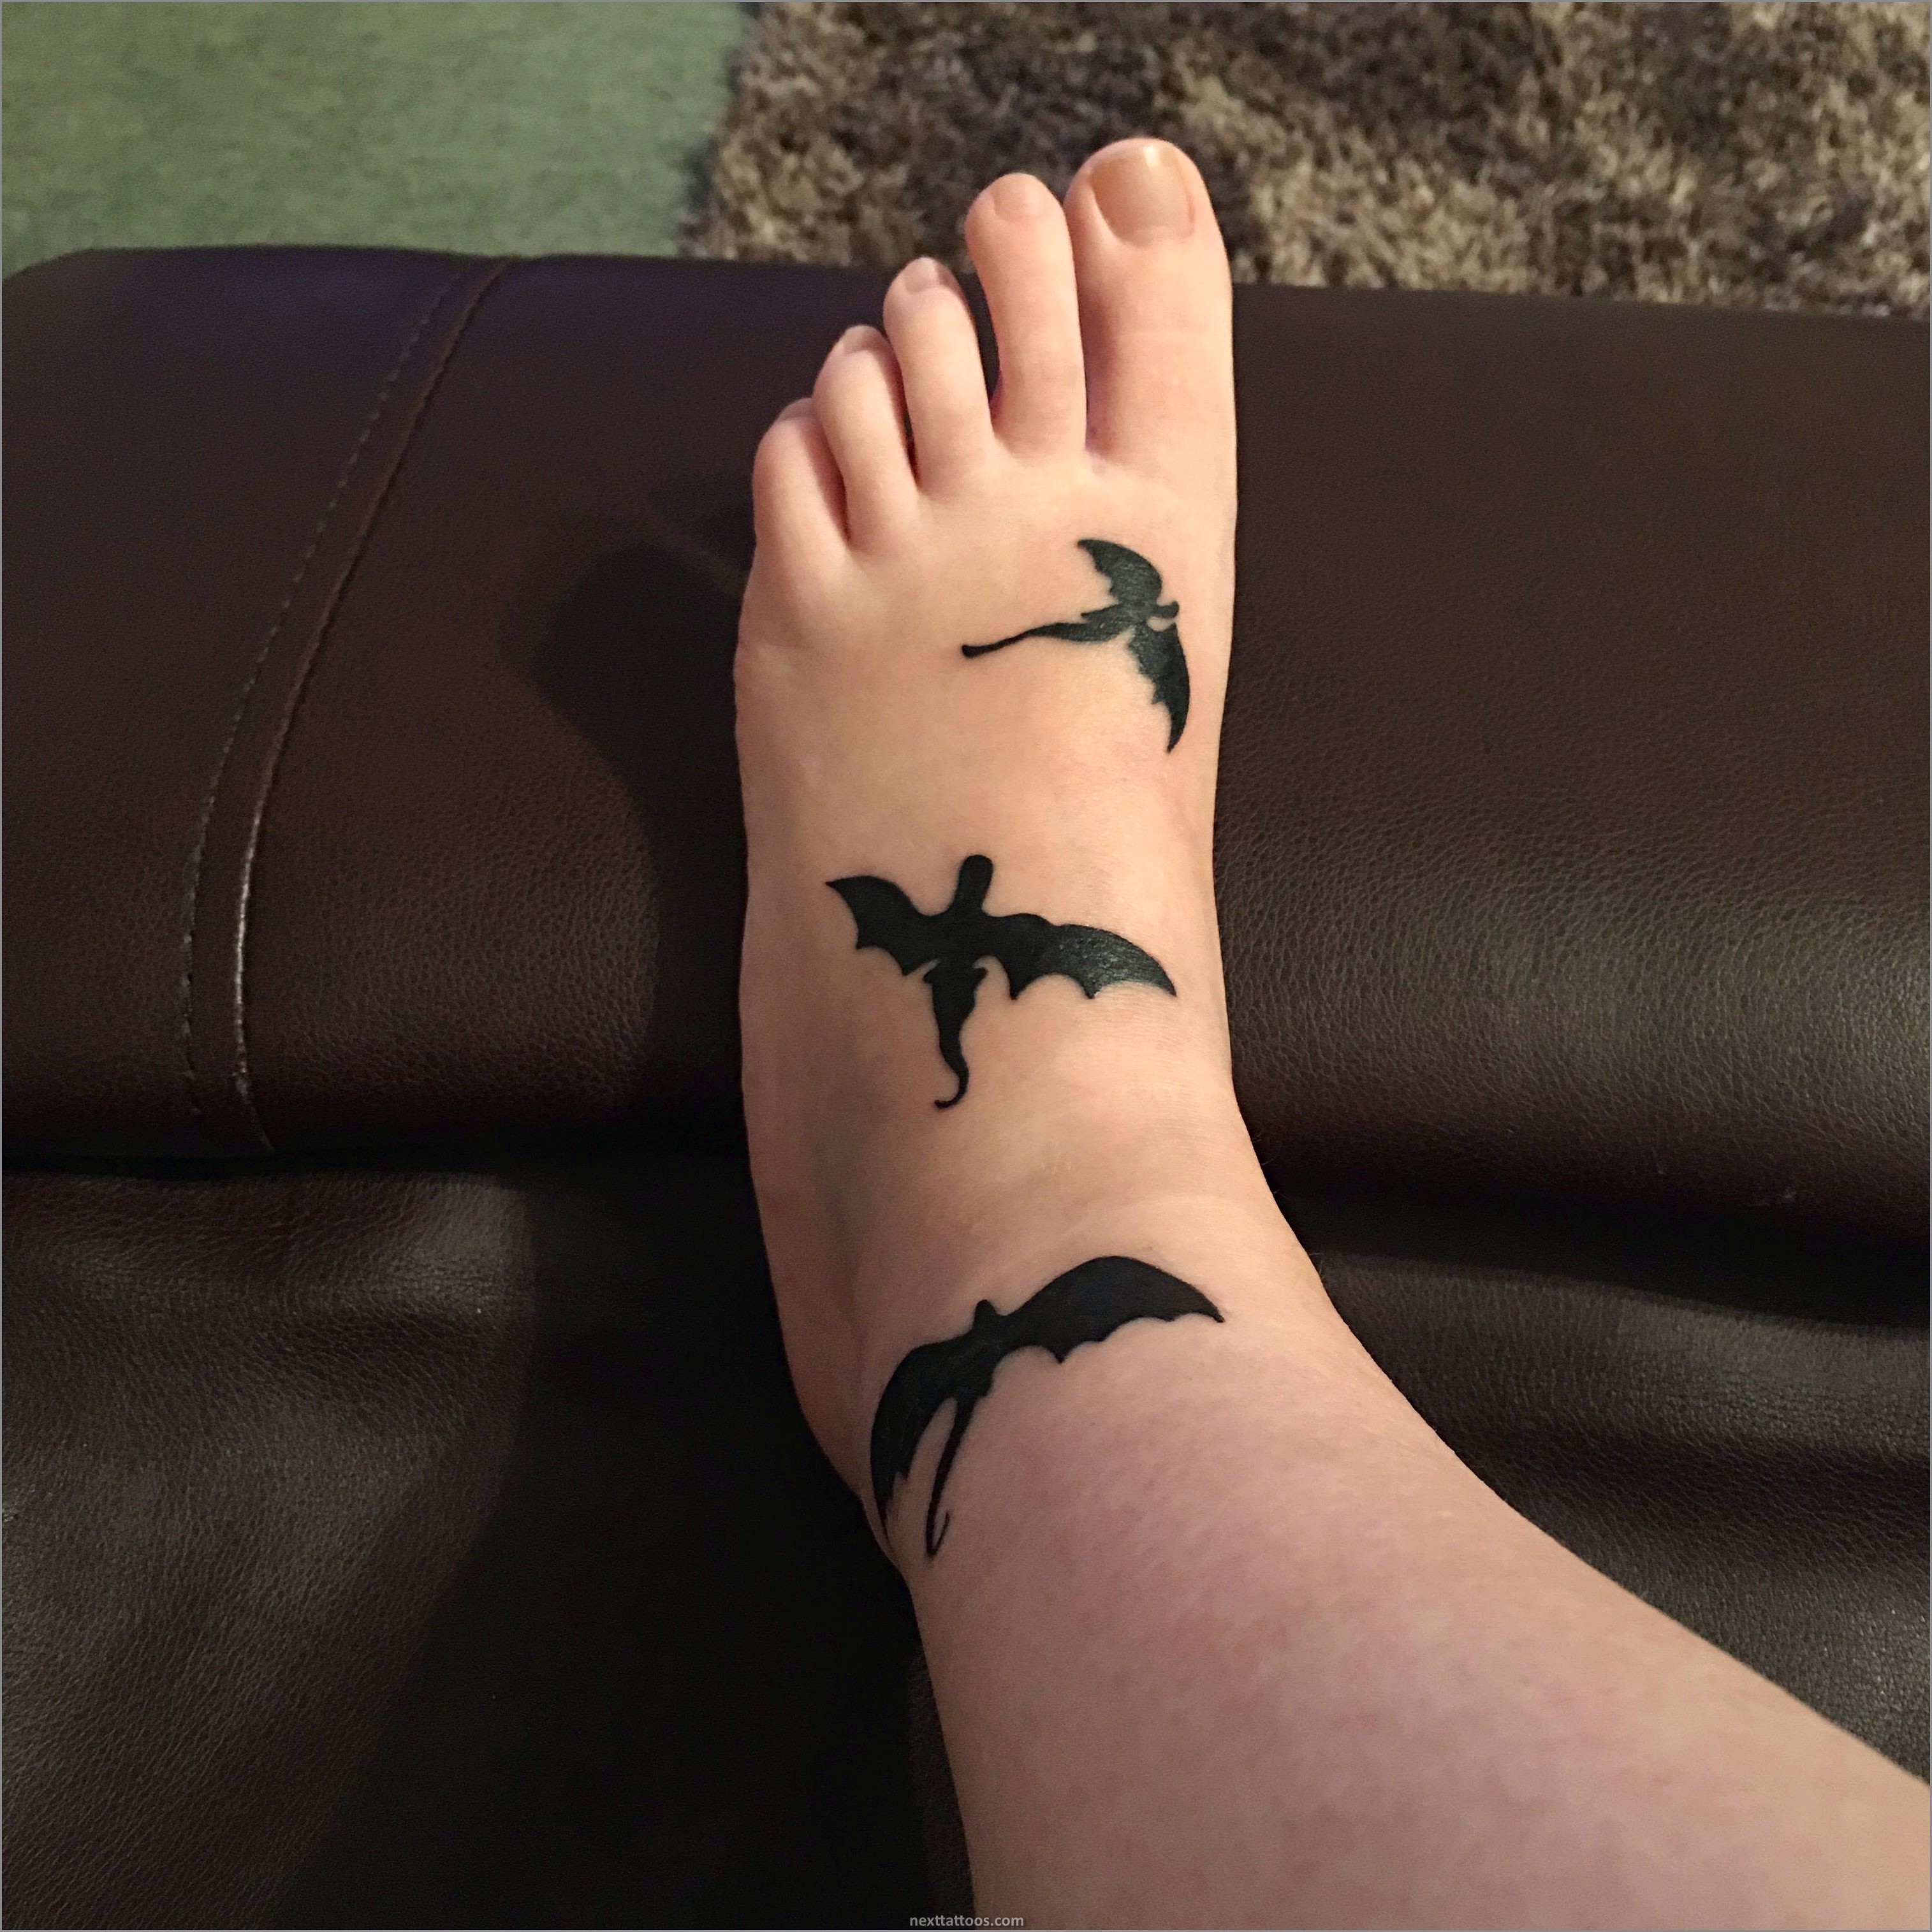 Ankle Tattoos For Girls - How to Choose a Tattoo Design For Your Ankle